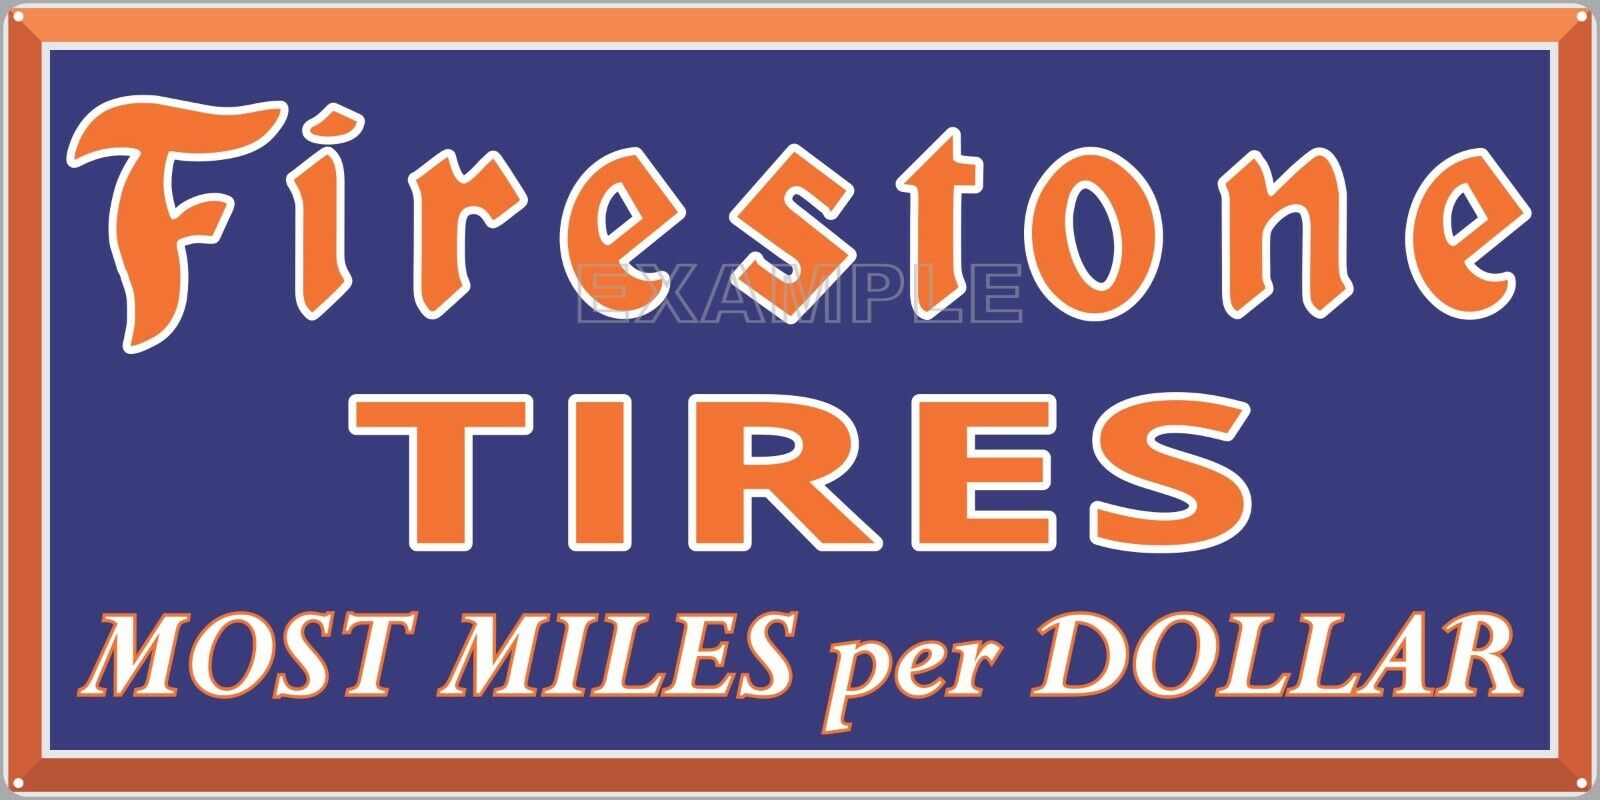 FIRESTONE TIRES REPAIR GAS SERVICE STATION OLD SIGN REMAKE ALUMINUM SIZE OPTIONS